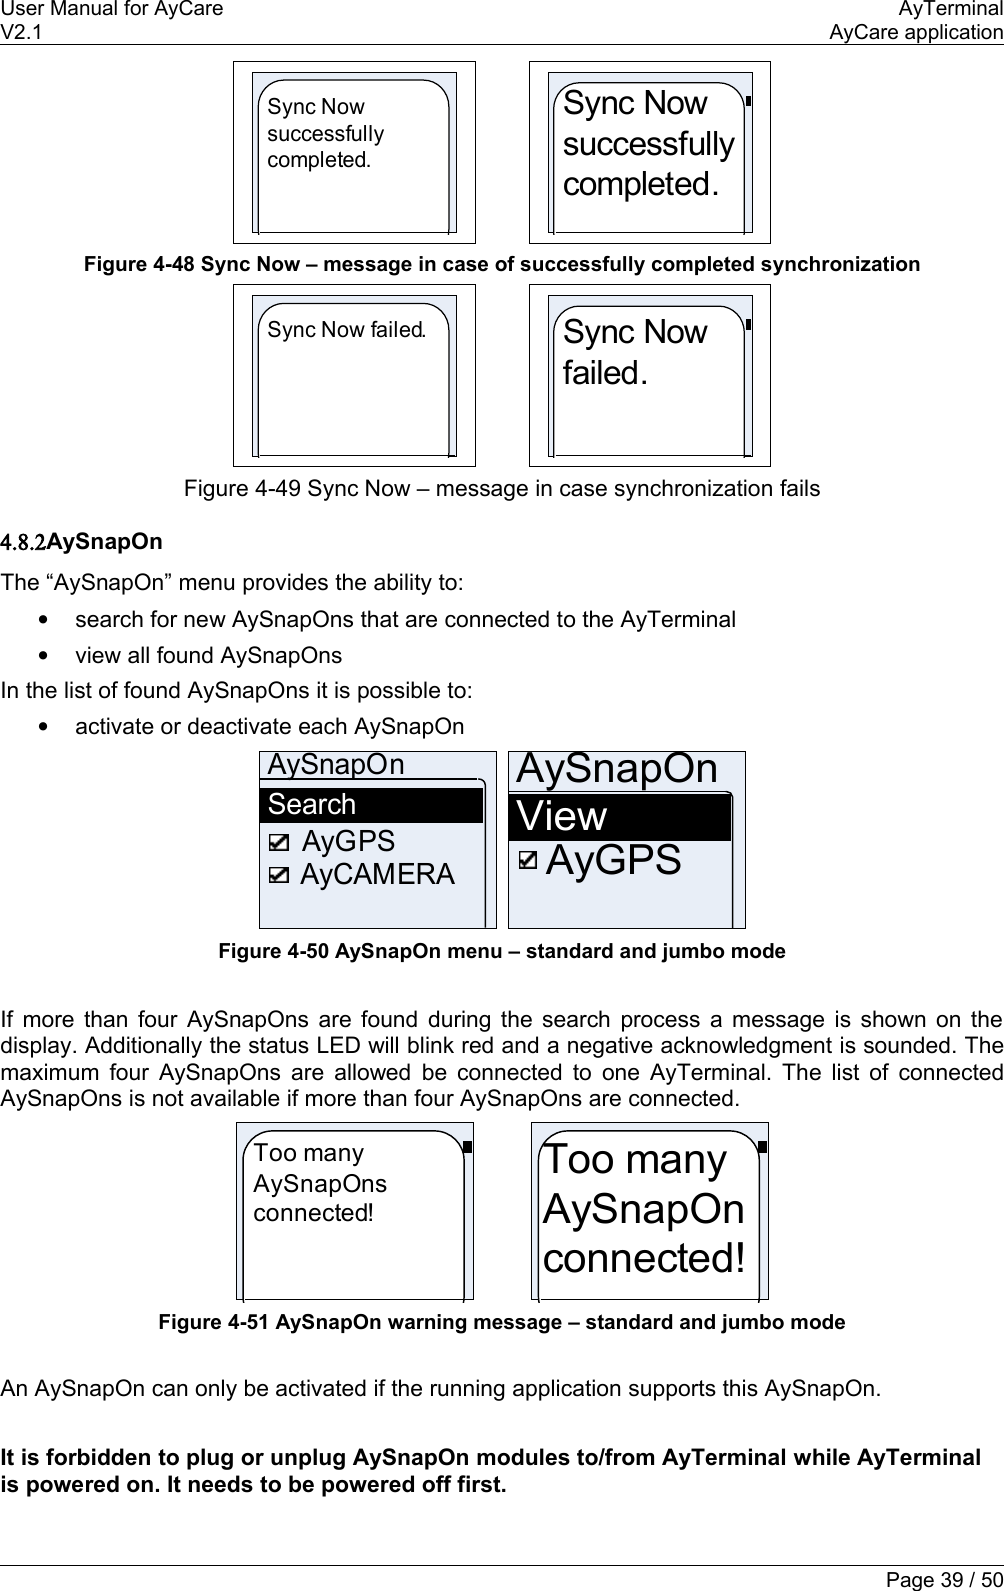 User Manual for AyCare AyTerminalV2.1 AyCare applicationSync Now successfully completed.Sync Now successfully completed.Figure 4-48 Sync Now – message in case of successfully completed synchronizationSync Now failed.Sync Now failed.Figure 4-49 Sync Now – message in case synchronization fails4.8.2AySnapOnThe “AySnapOn” menu provides the ability to:•search for new AySnapOns that are connected to the AyTerminal•view all found AySnapOnsIn the list of found AySnapOns it is possible to:•activate or deactivate each AySnapOnAySnapOnSearchAyCAMERAAyGPS AySnapOnViewAyGPSFigure 4-50 AySnapOn menu – standard and jumbo modeIf more than four AySnapOns are found during the search process a message is shown on the display. Additionally the status LED will blink red and a negative acknowledgment is sounded. The maximum four AySnapOns are allowed be connected to one AyTerminal. The list of connected AySnapOns is not available if more than four AySnapOns are connected.Too many AySnapOns connected!Too many AySnapOn connected!Figure 4-51 AySnapOn warning message – standard and jumbo modeAn AySnapOn can only be activated if the running application supports this AySnapOn. It is forbidden to plug or unplug AySnapOn modules to/from AyTerminal while AyTerminal is powered on. It needs to be powered off first.Page 39 / 50